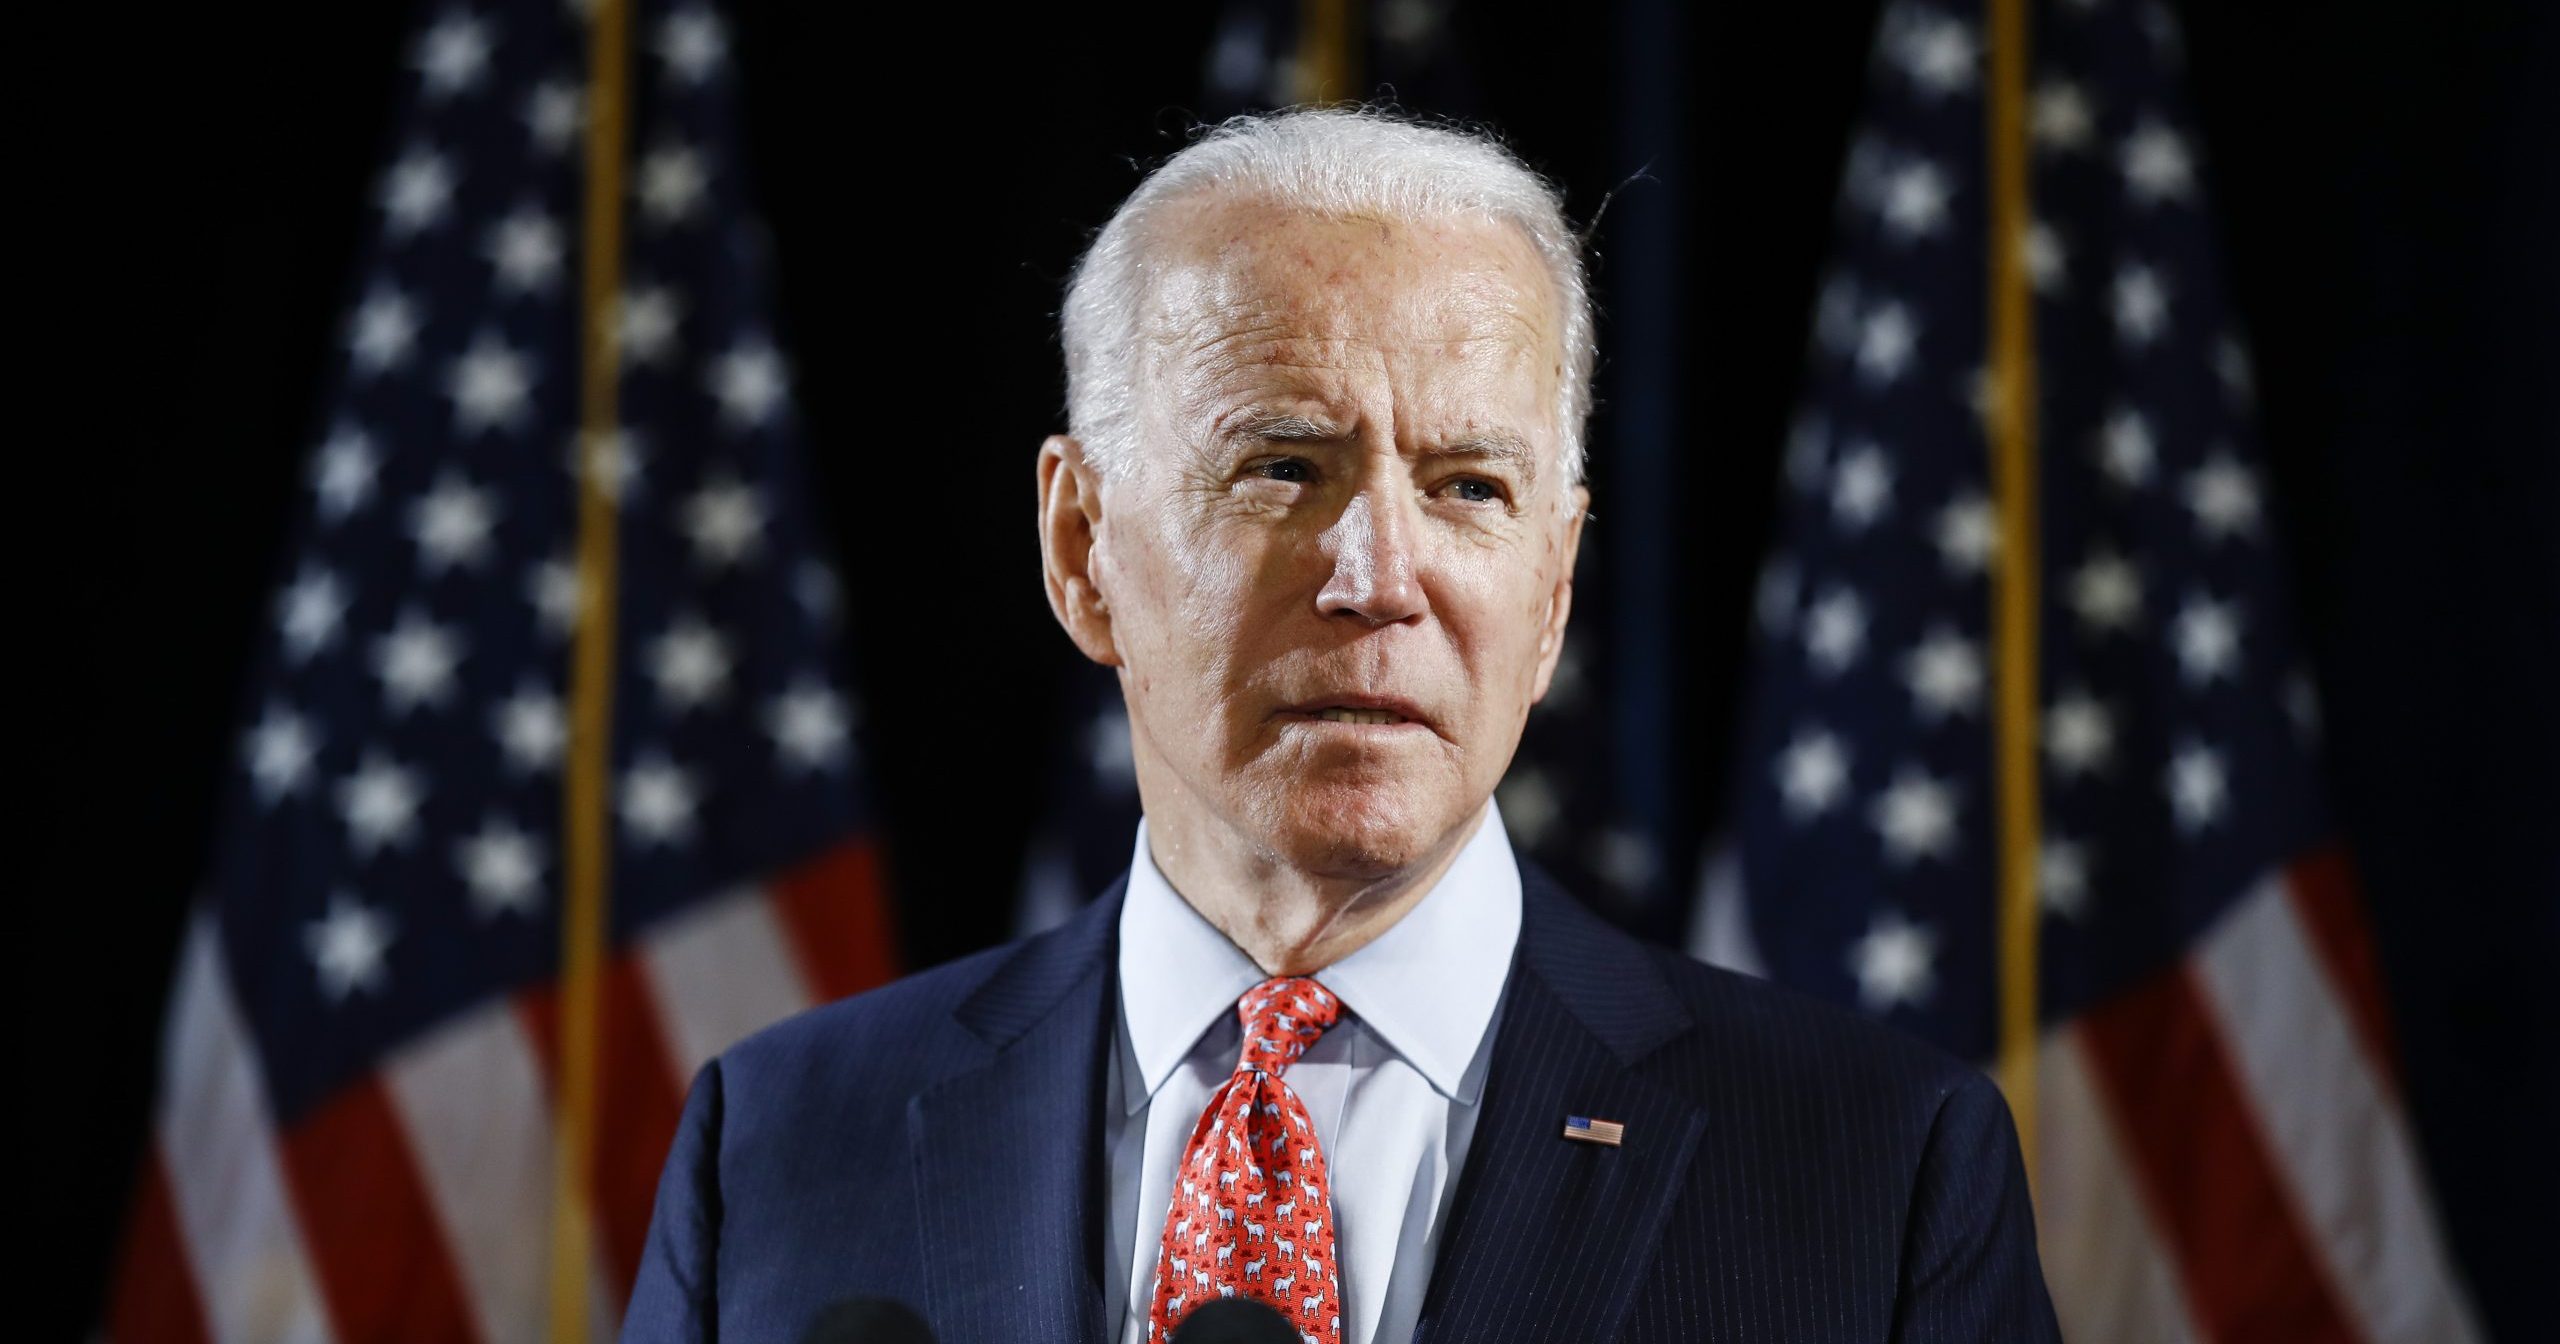 In this March 12, 2020, file photo, Democratic presidential candidate former Vice President Joe Biden speaks about the coronavirus in Wilmington, Delaware.